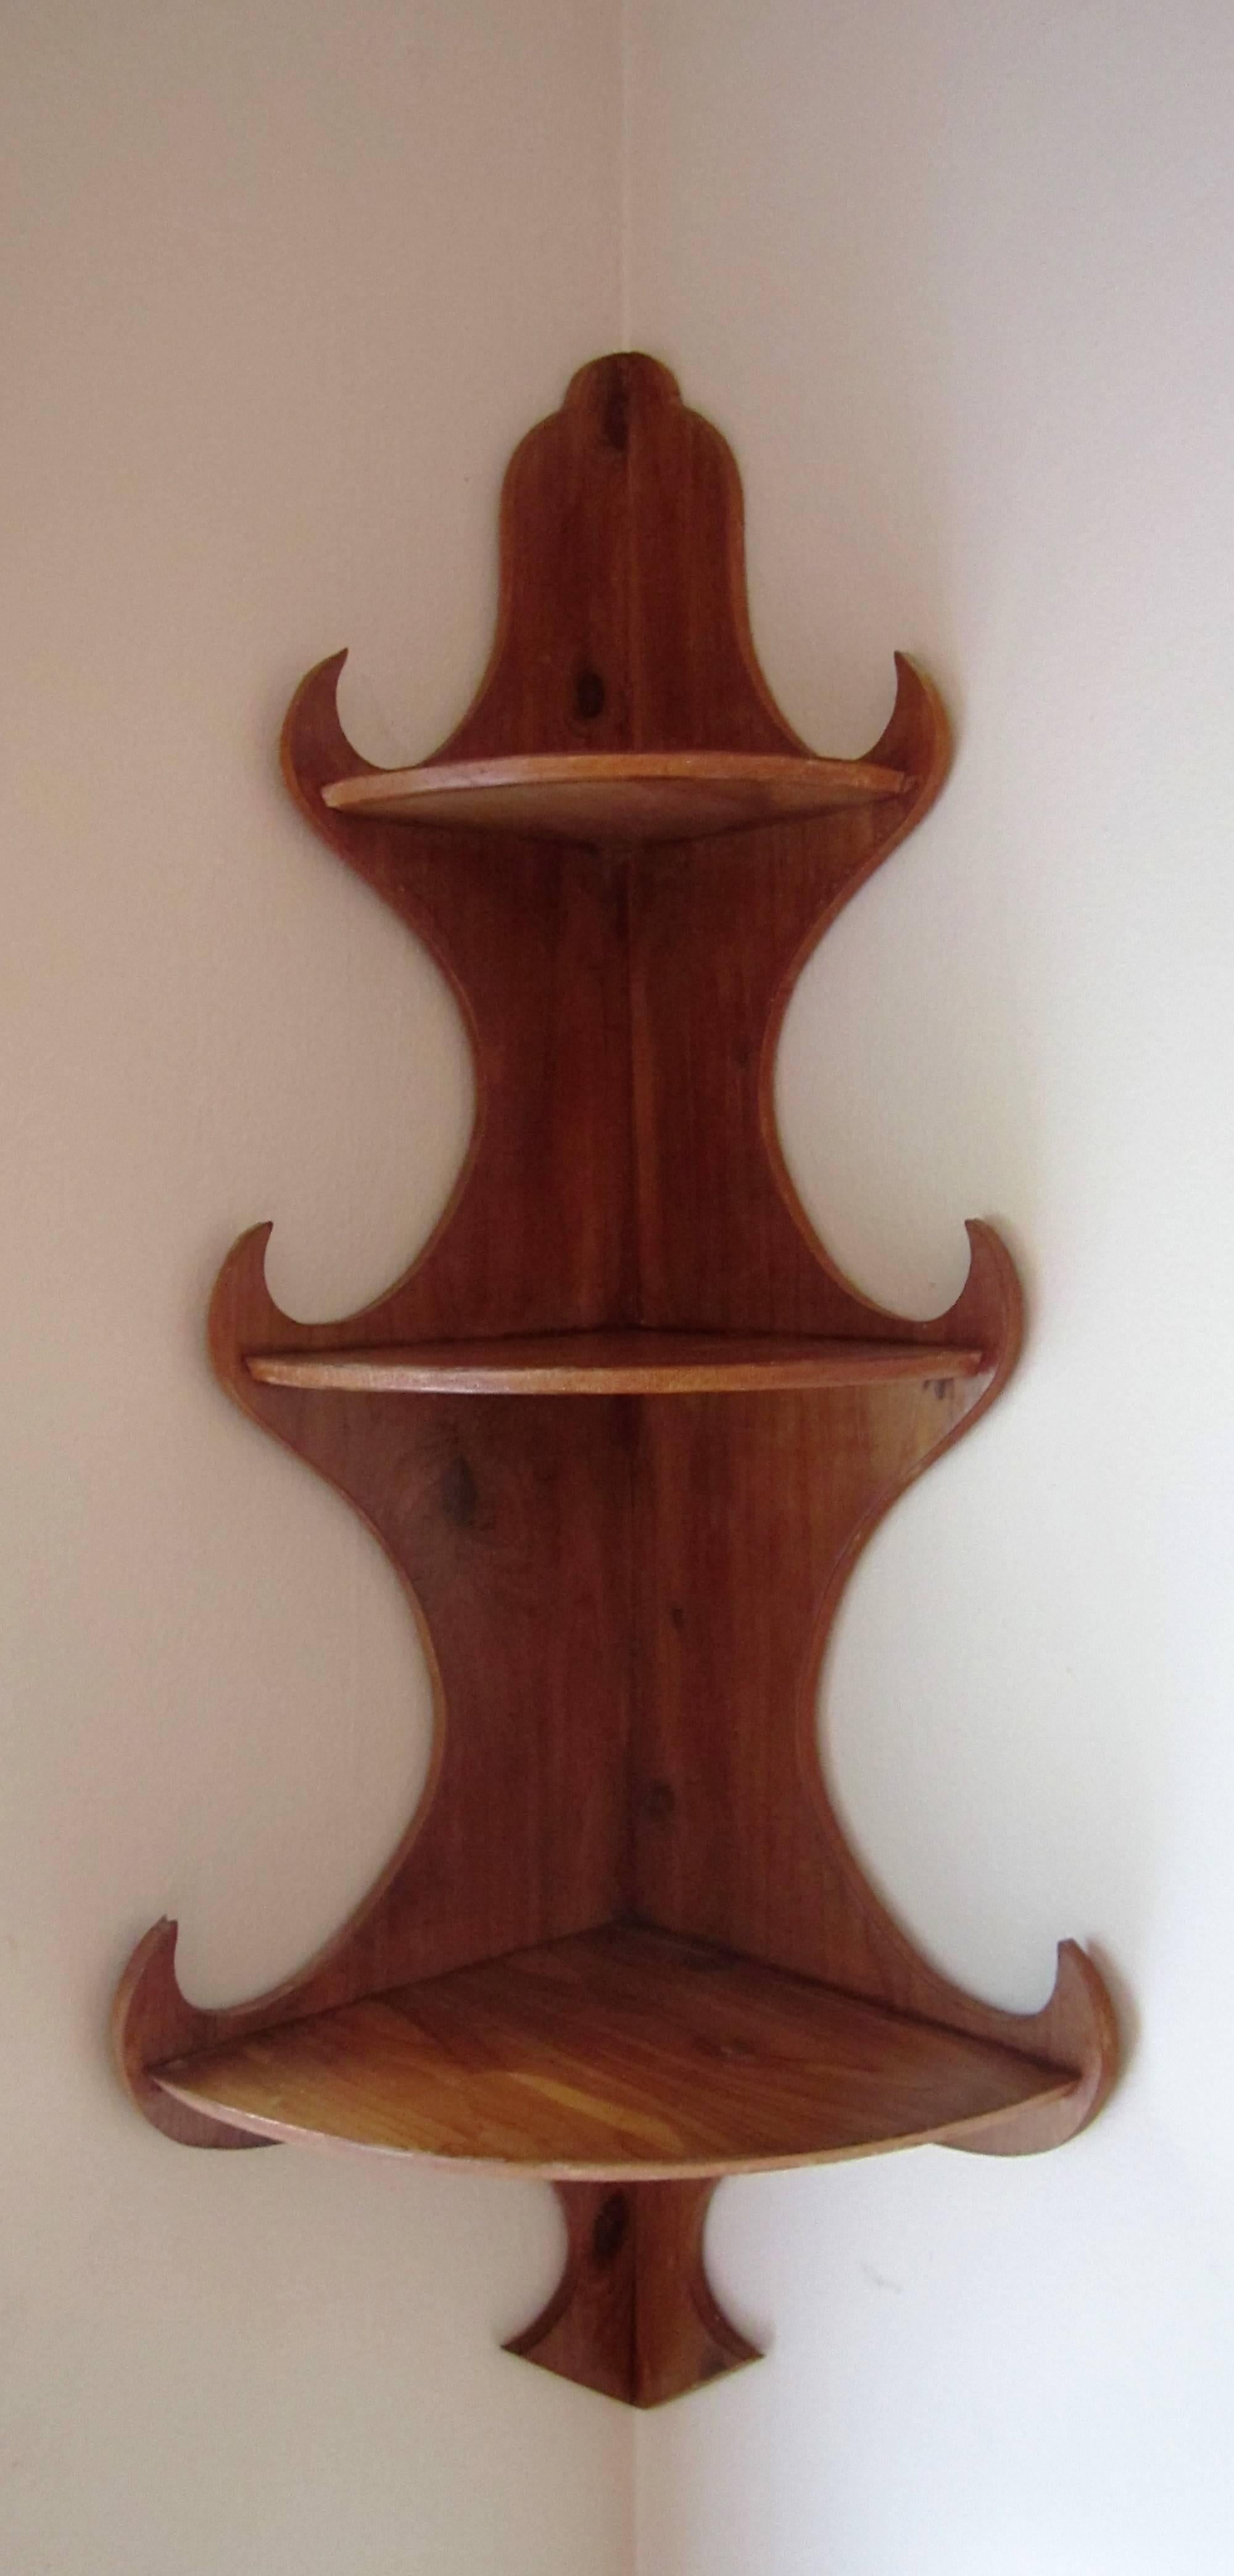 A beautifully constructed vintage hanging corner wall wood shelf. The construction is dovetailed and well made. The scale of the shelves are shown in images with decorative pieces. 

Measurements include: 23